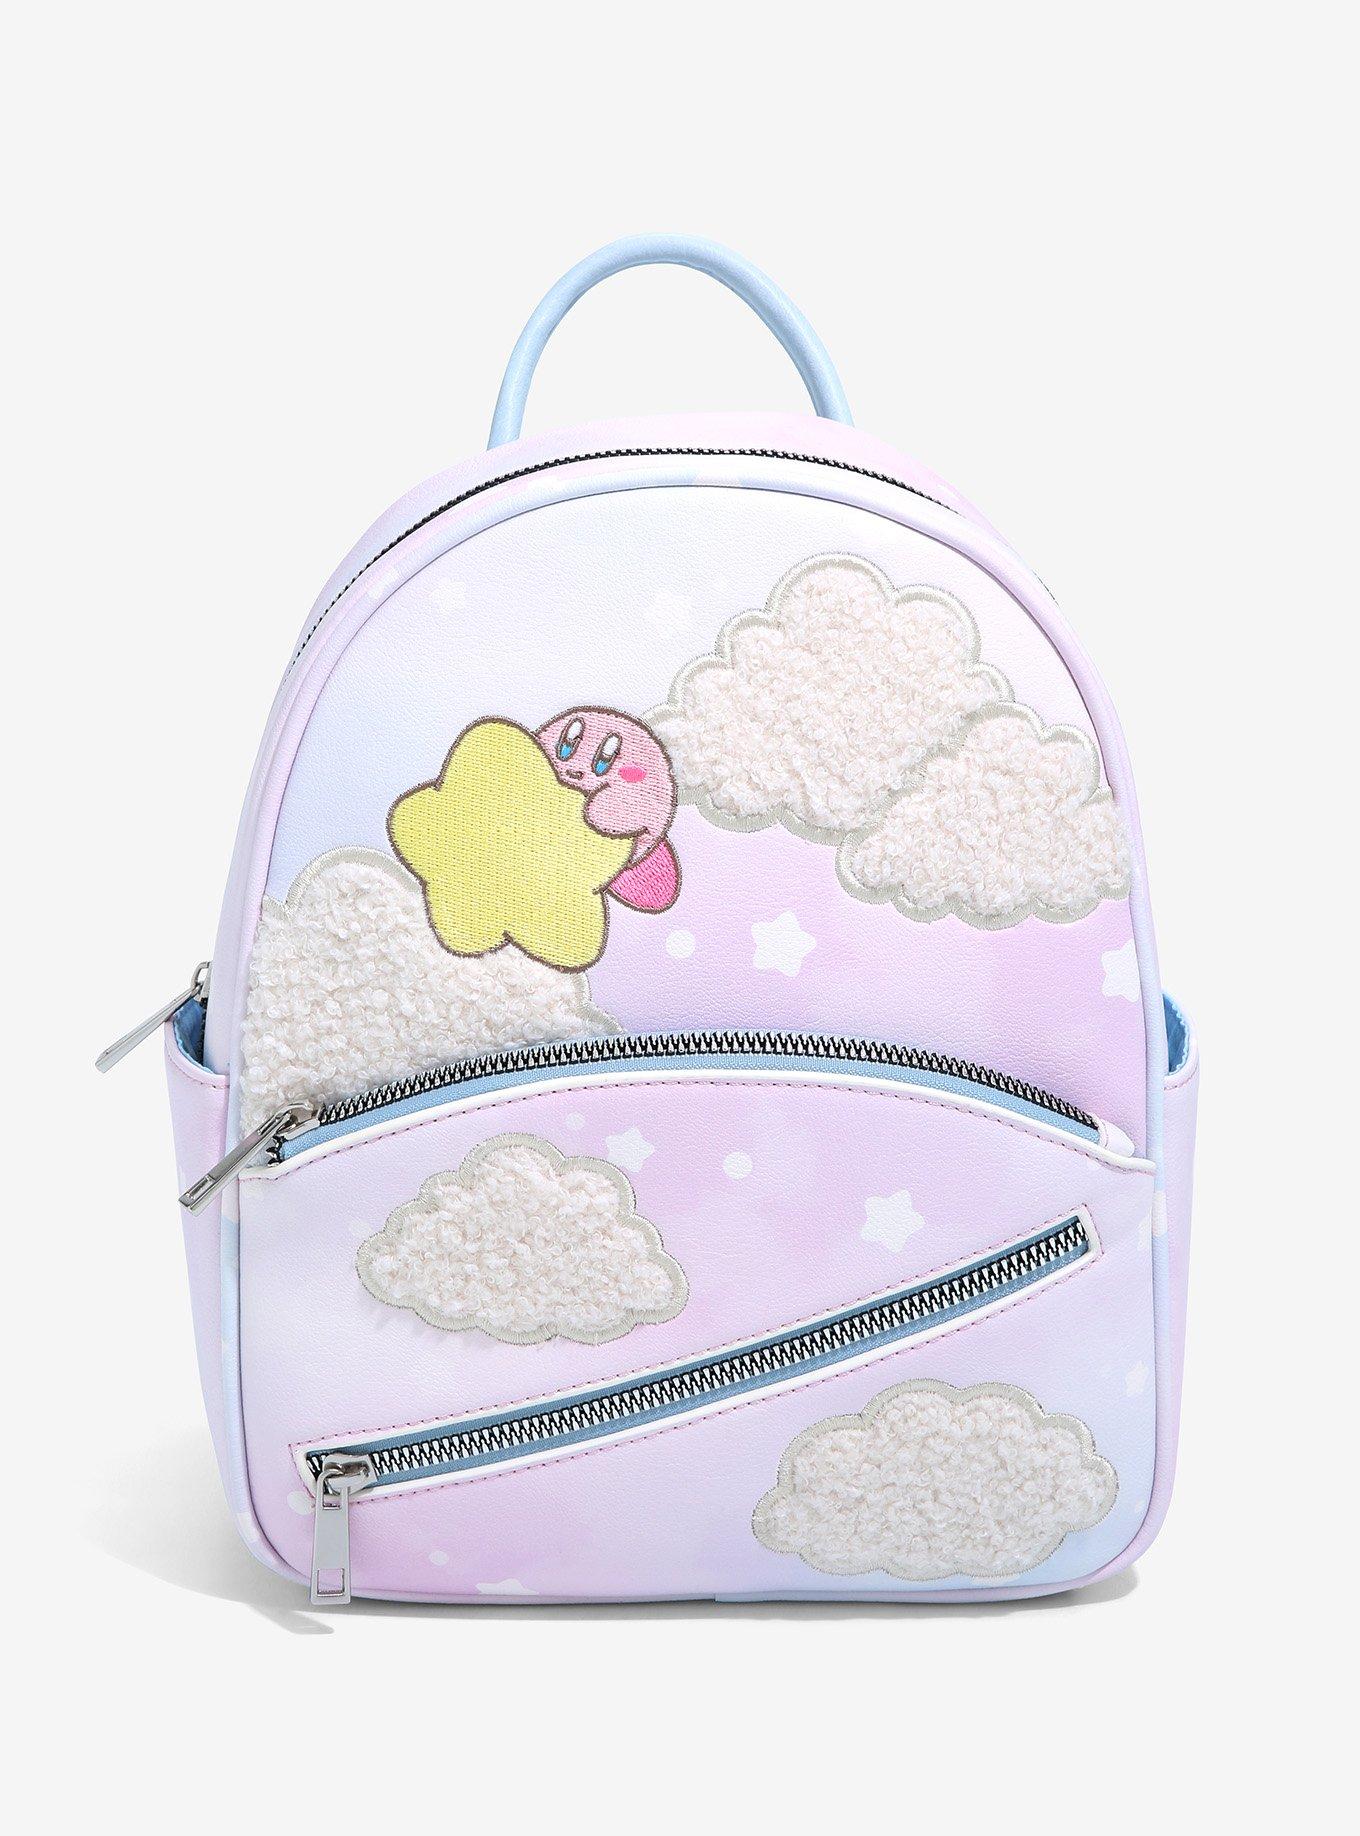 Kids Backpack and Lunch Box Set with Bento Box, Pastel Pink Tie Dye  Backpack Set, Gives Back to a Great Cause, 17 Inches